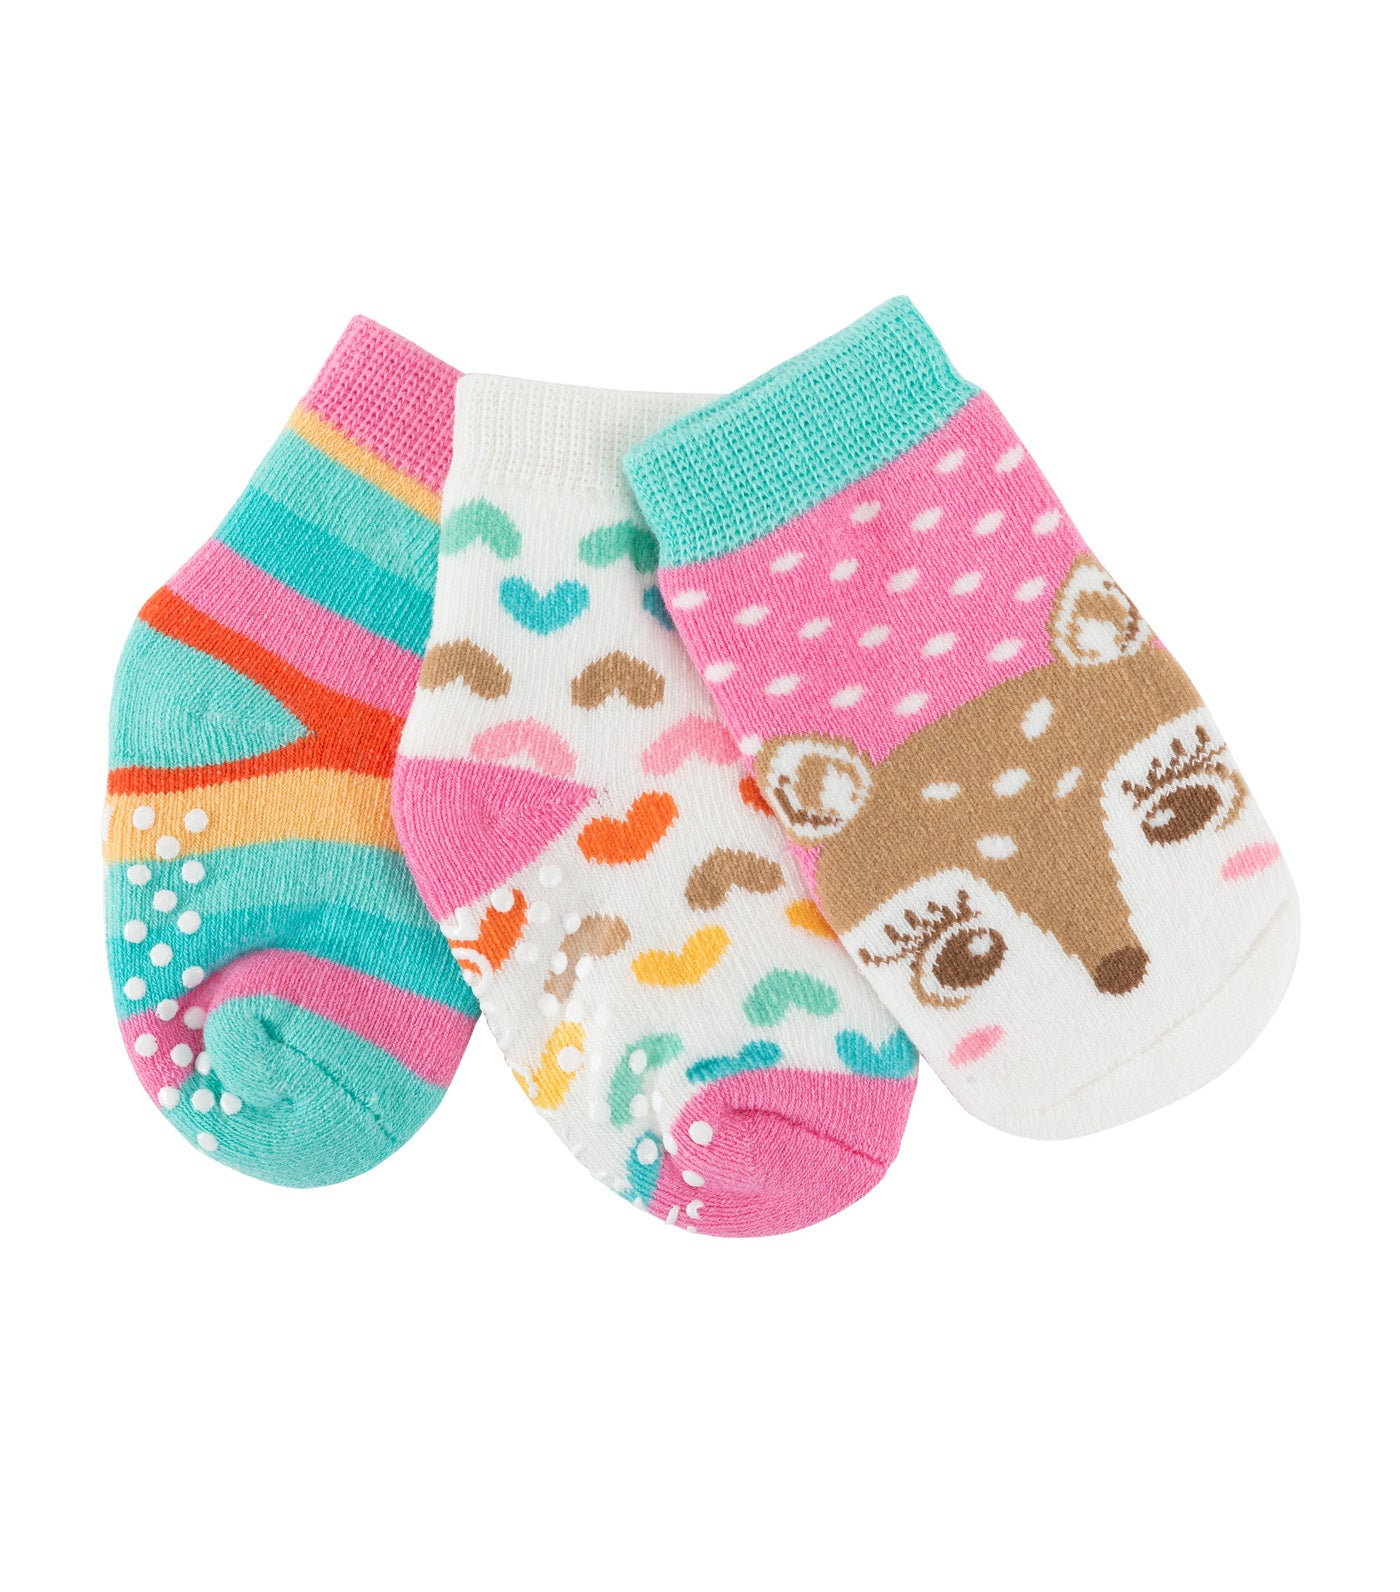 zoochini multicolor baby comfort socks set - fiona the fawn (set of 3)